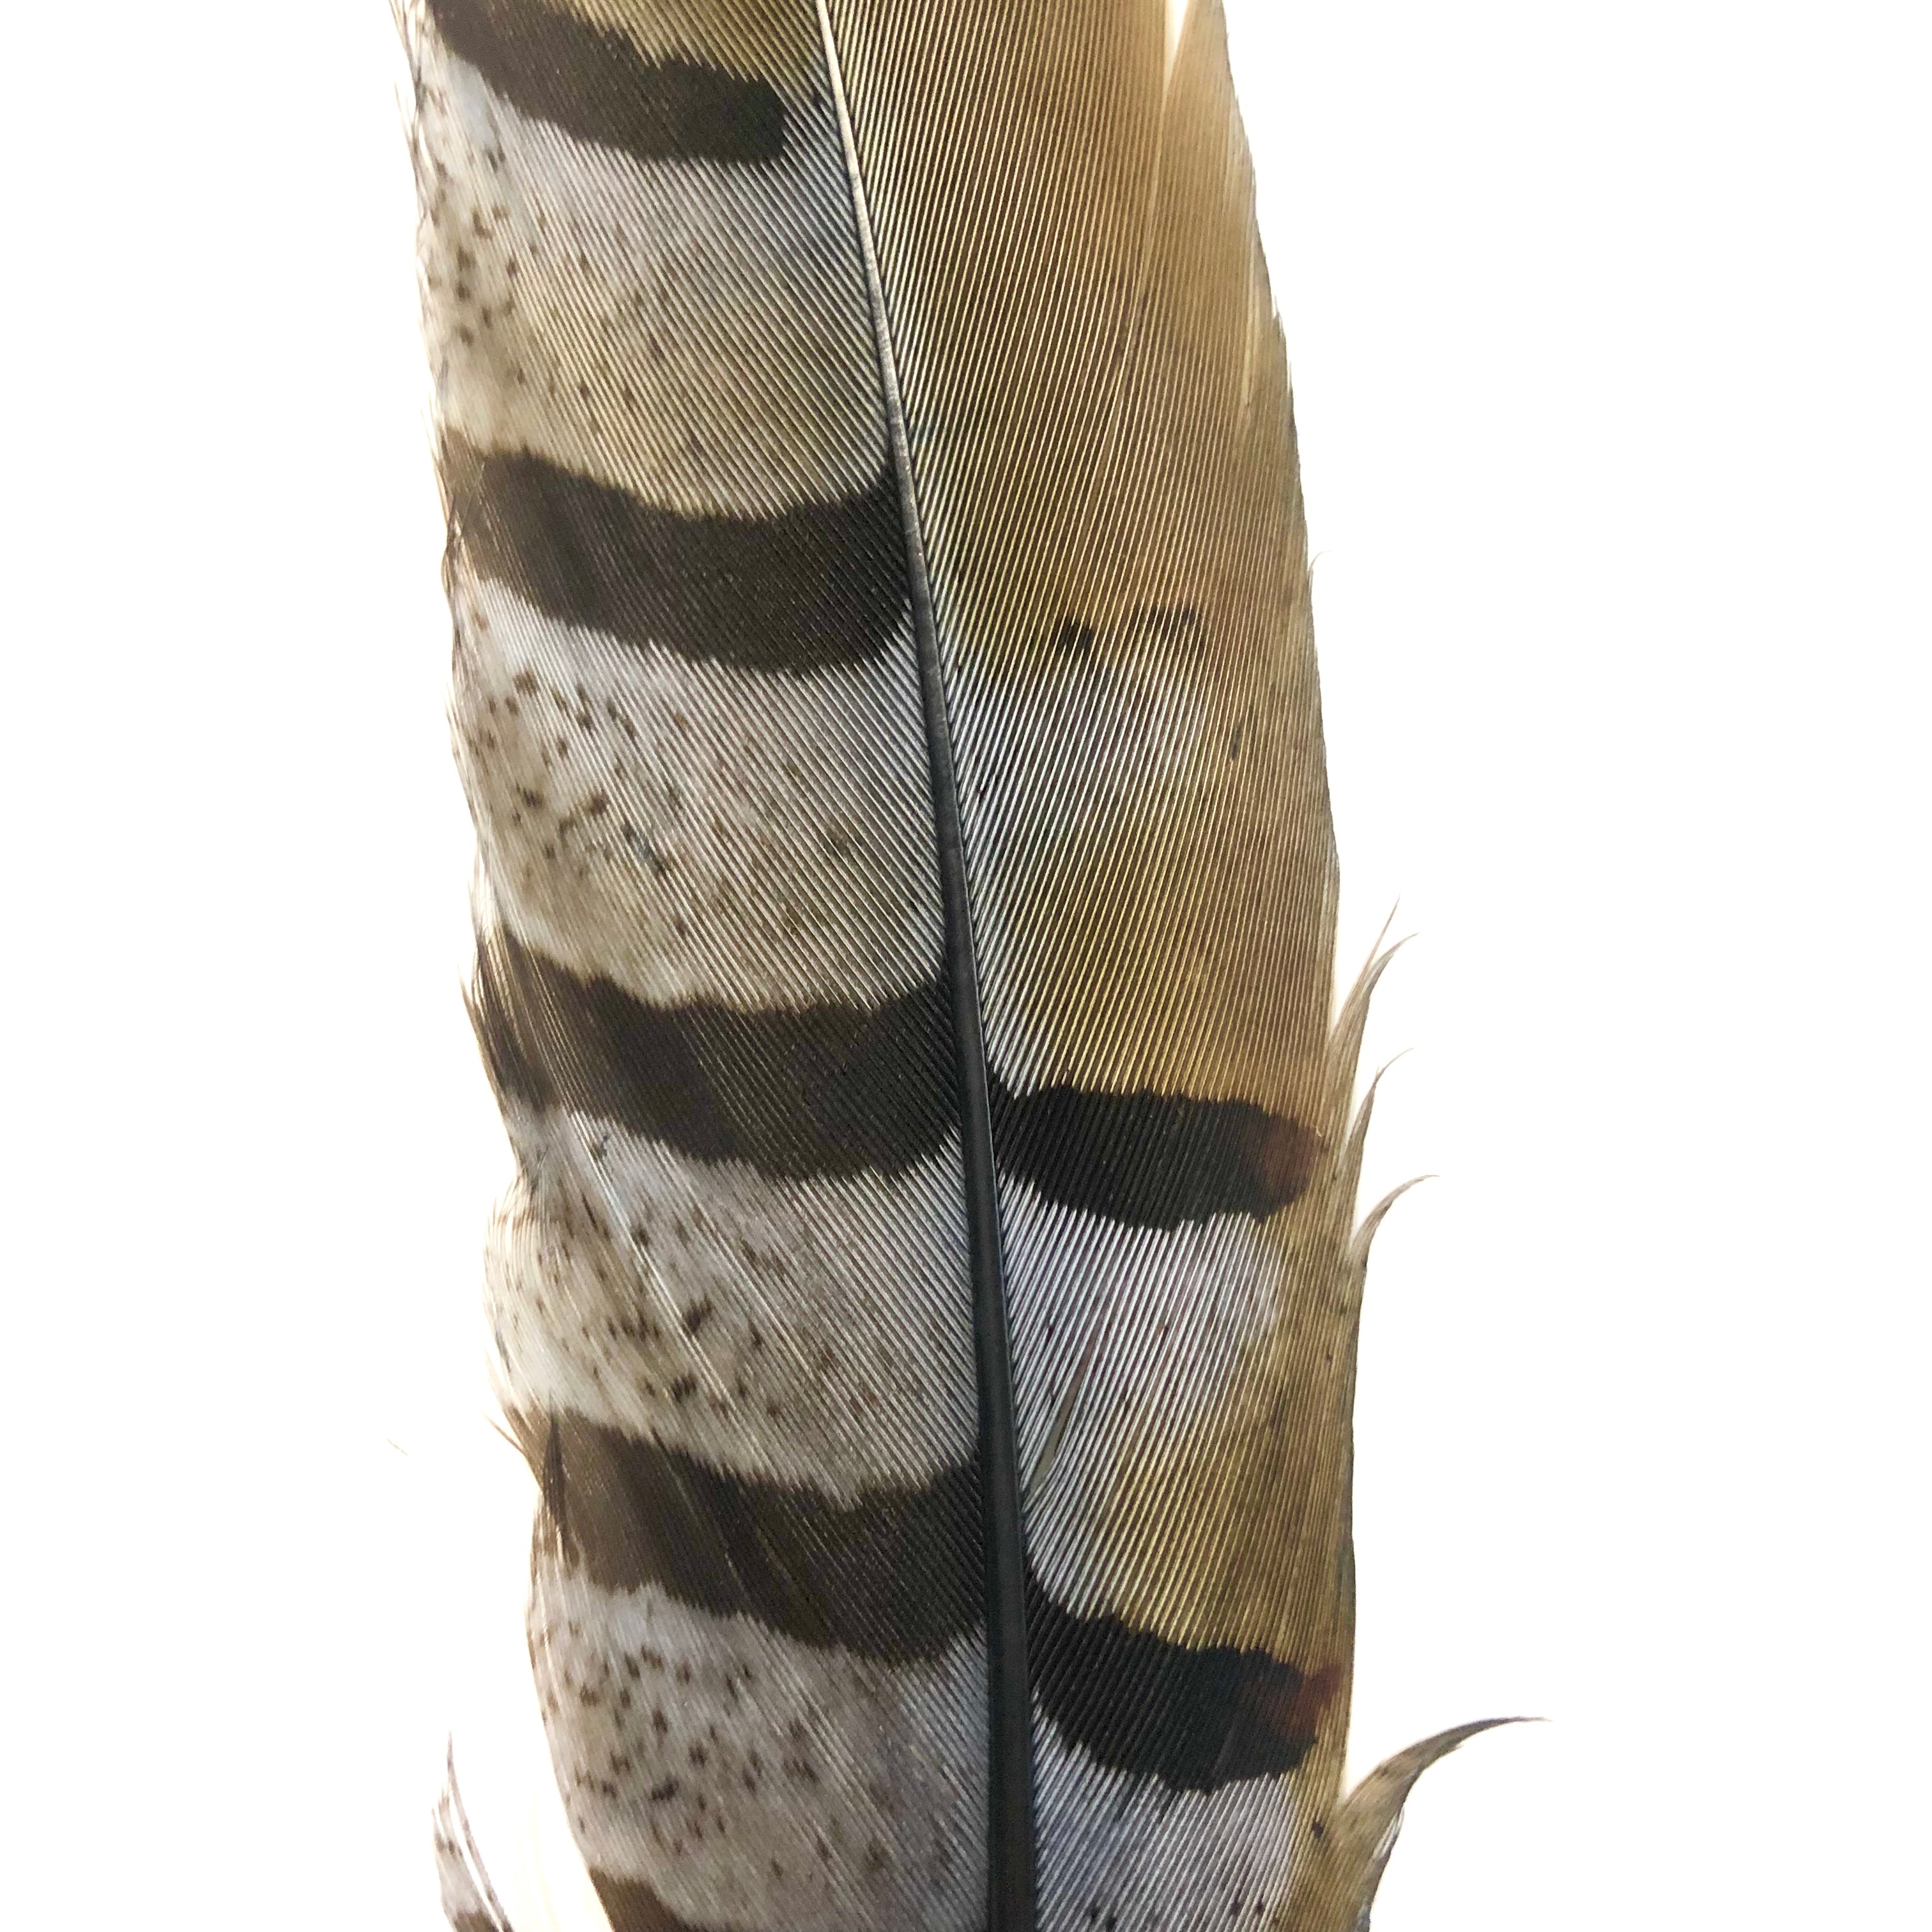 8" to 10" Reeves Pheasant Tail Feather - Grey